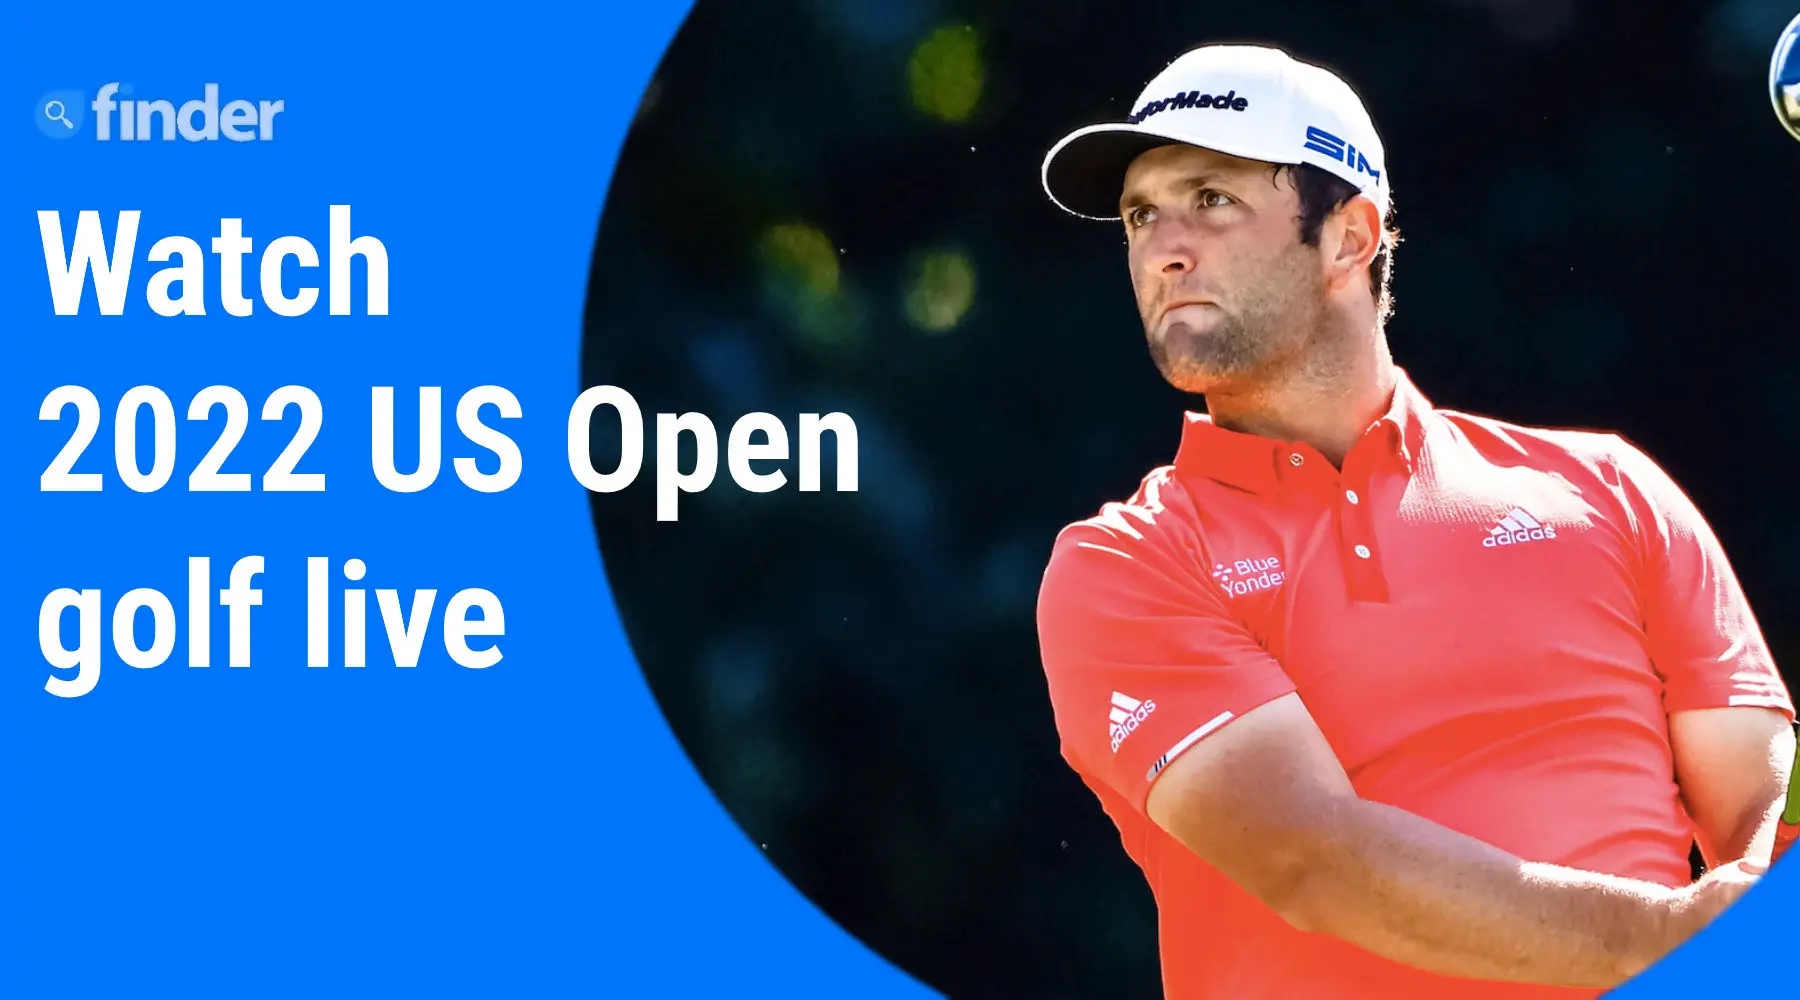 How to watch the 2022 US Open golf tournament live online in Australia Finder